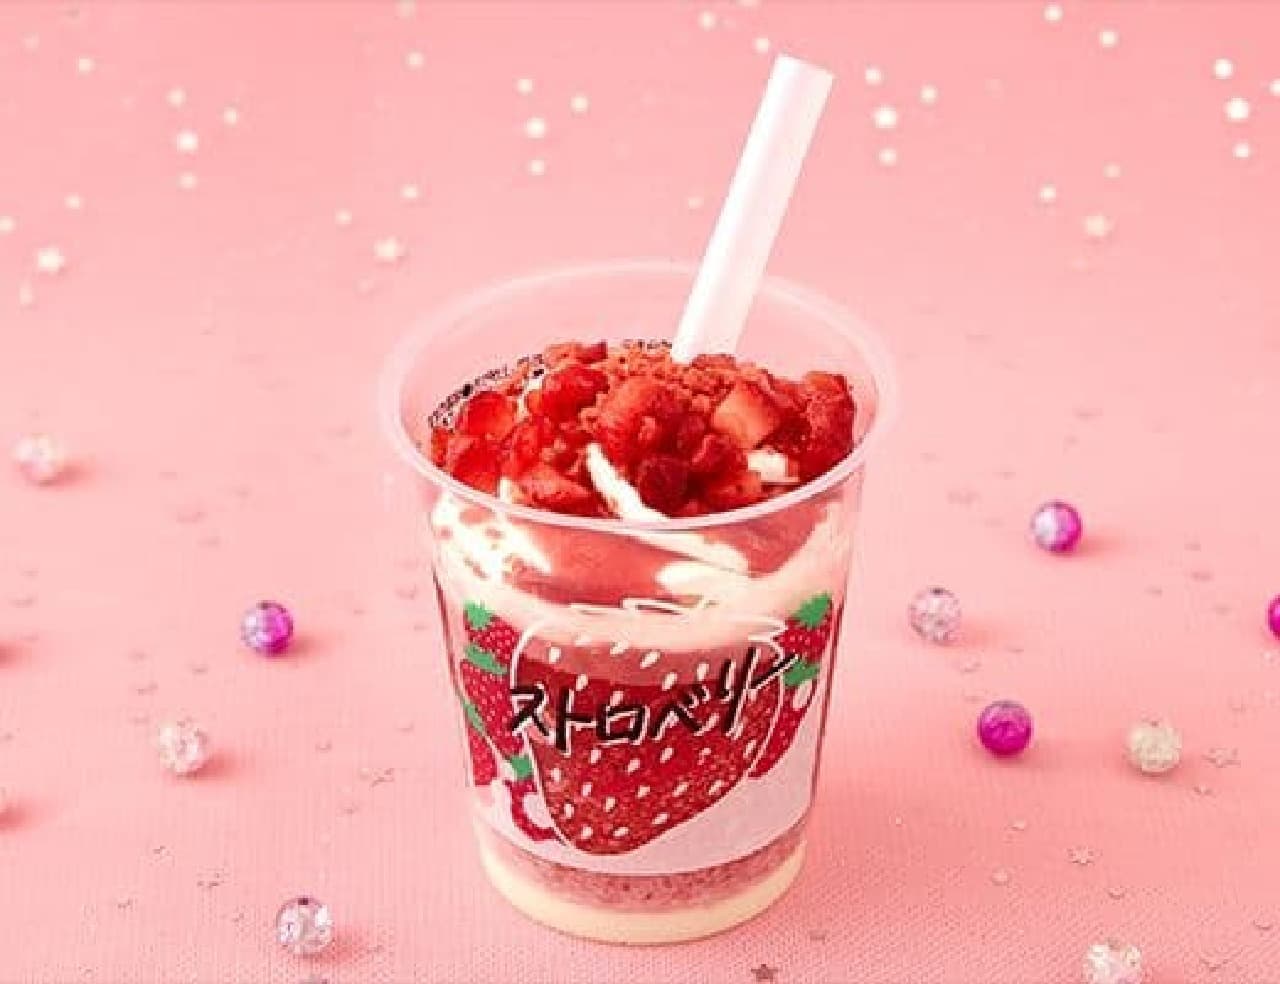 Lawson "Frozen Party Strawberry 242g"